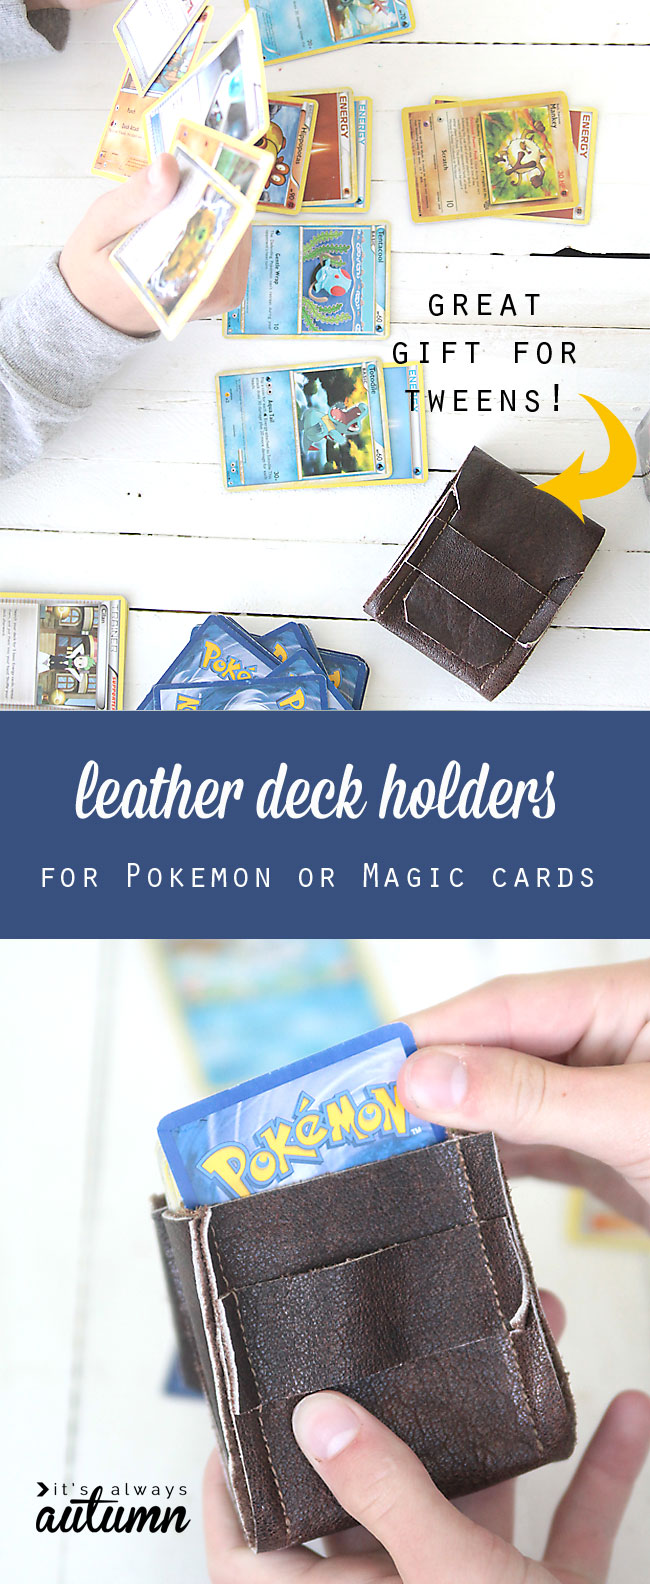 kids playing with pokemon cards; DIY leather deck holder for cards